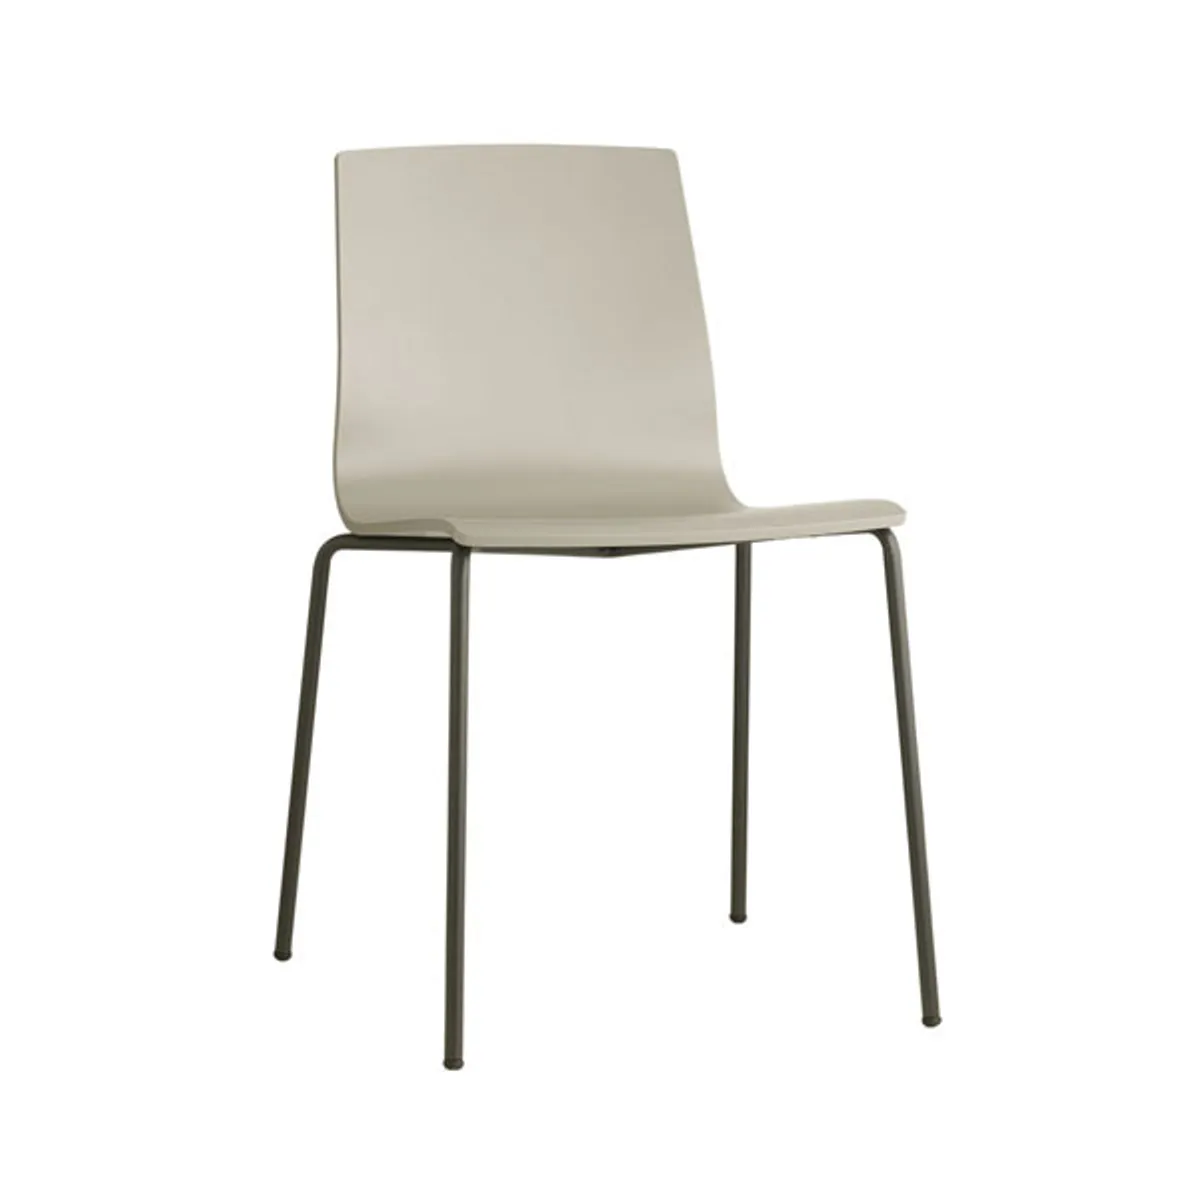 Evie 2 metal side chair 1 Inside Out Contracts